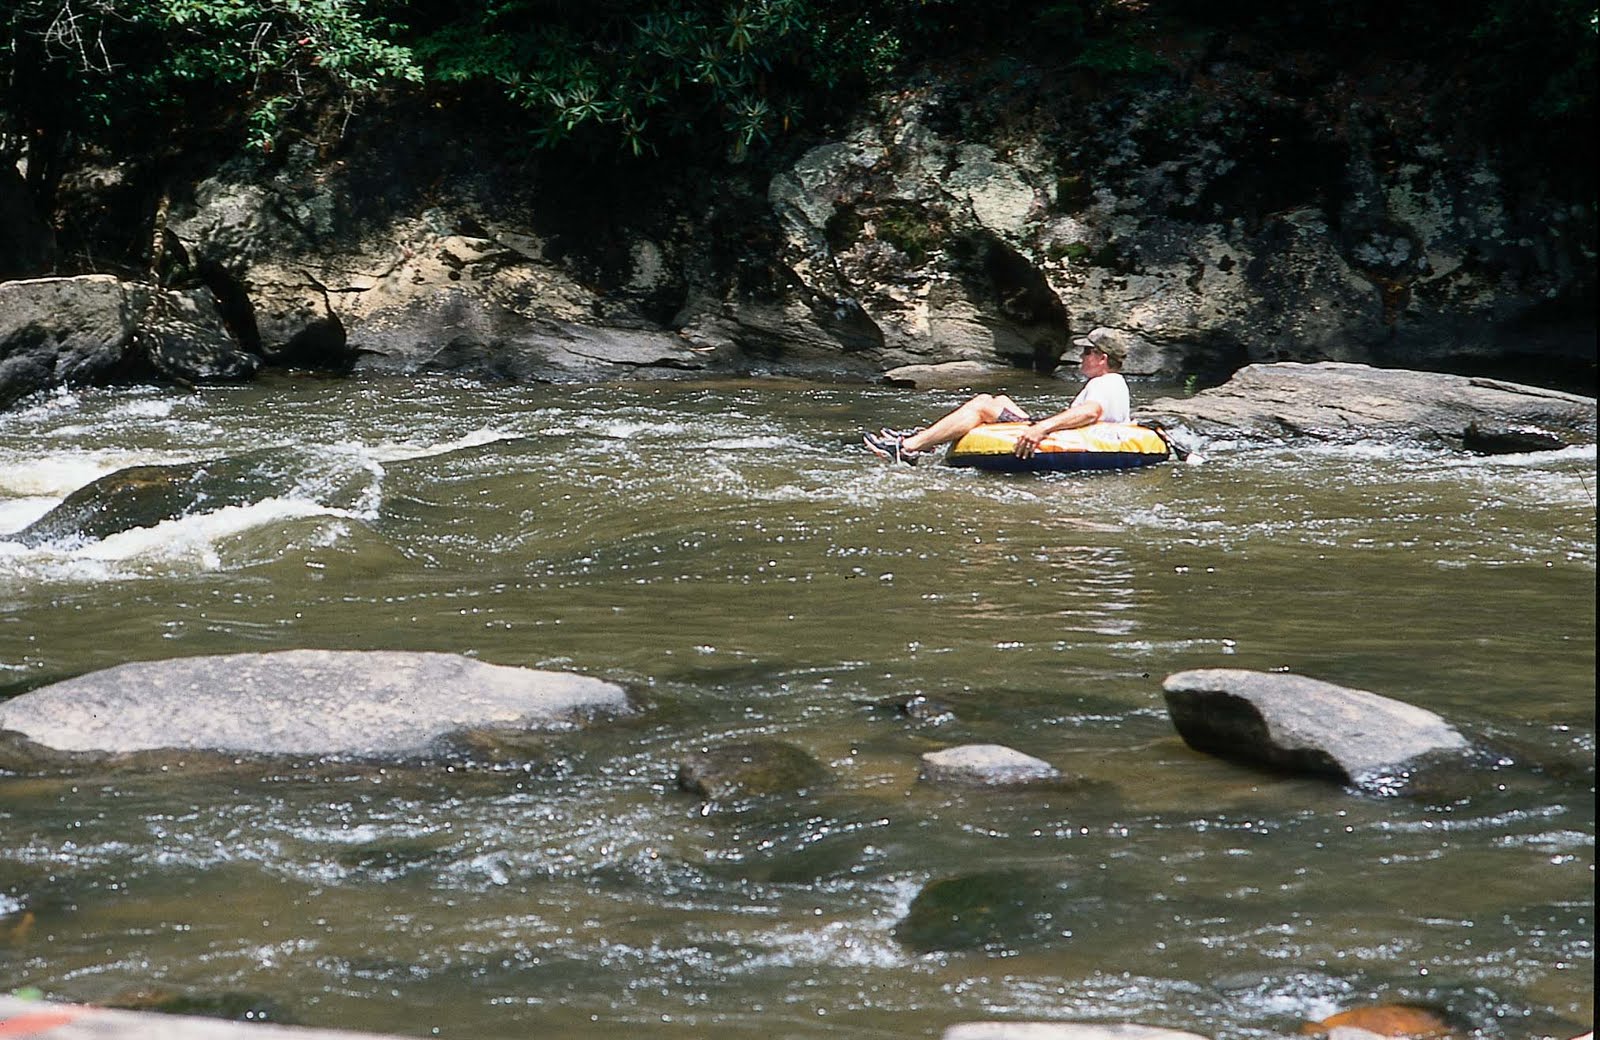 THE BLUE RIDGE EXPERIENCE: Staying Cool in Georgia's Blue Ridge River Tubing Blue Ridge Ga